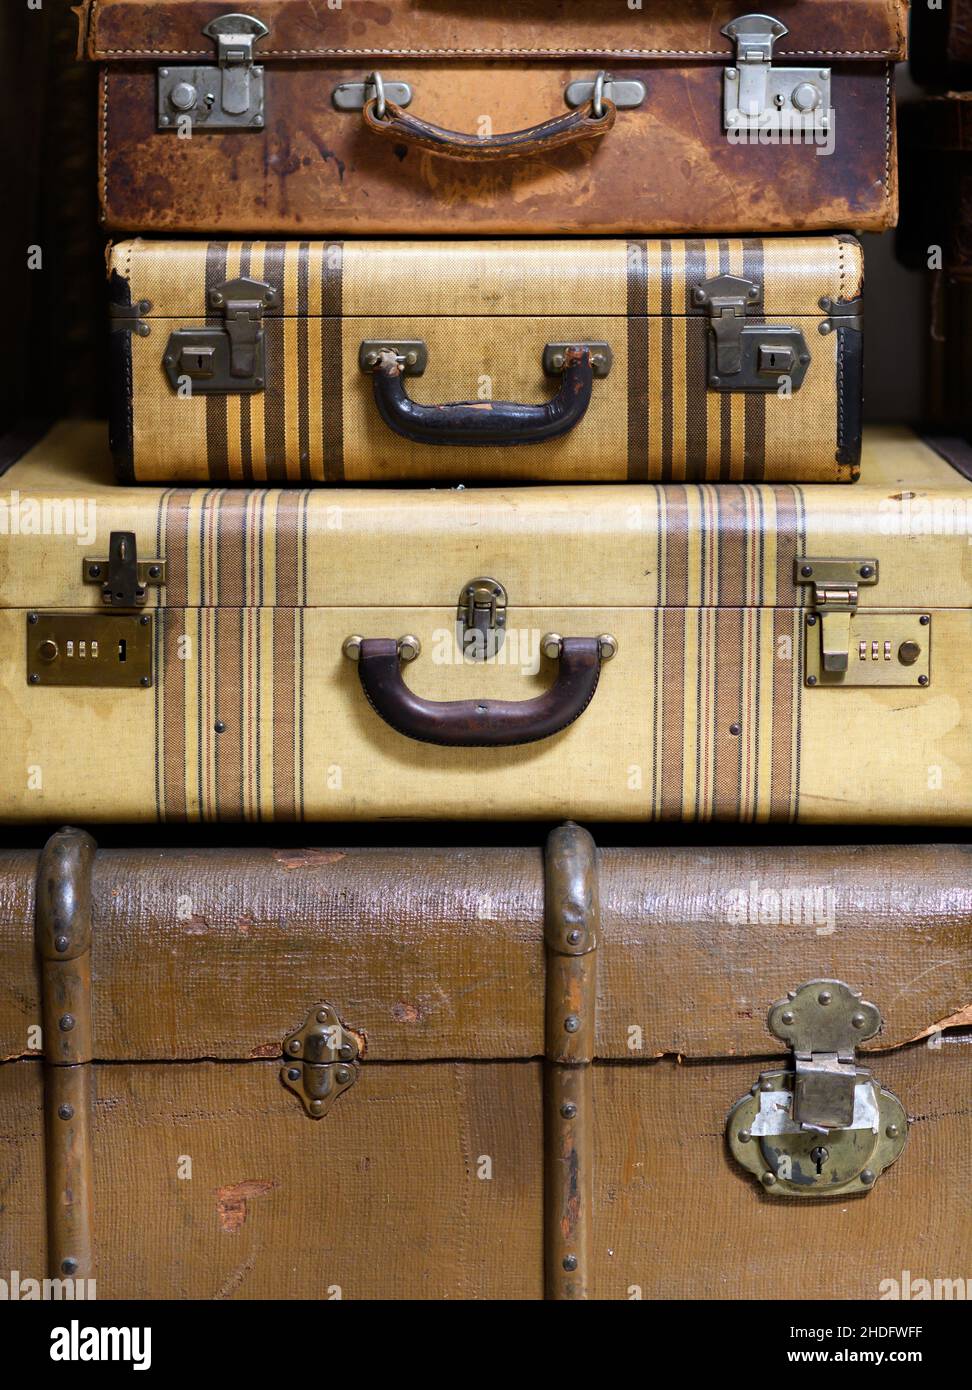 Vintage Travel Trunks - Classic Luggage with Style